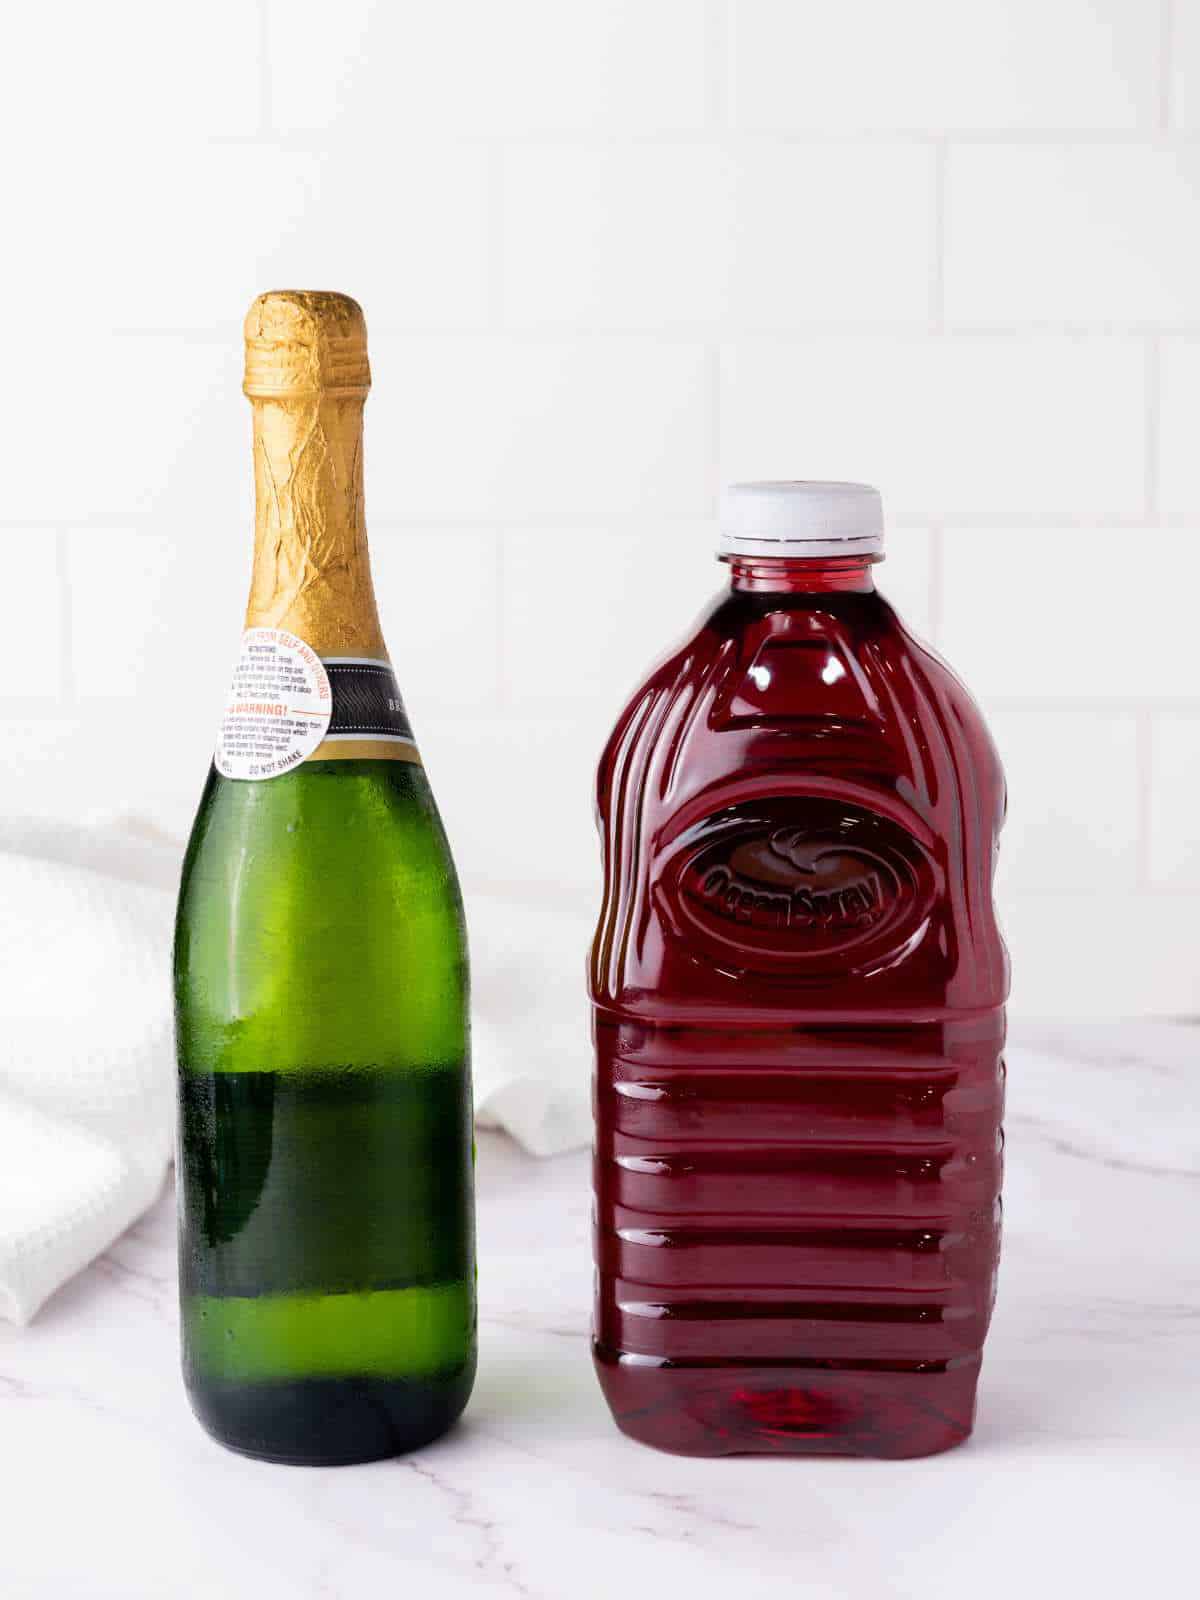 bottle of sparkling wine and a bottle of cranberry juice.